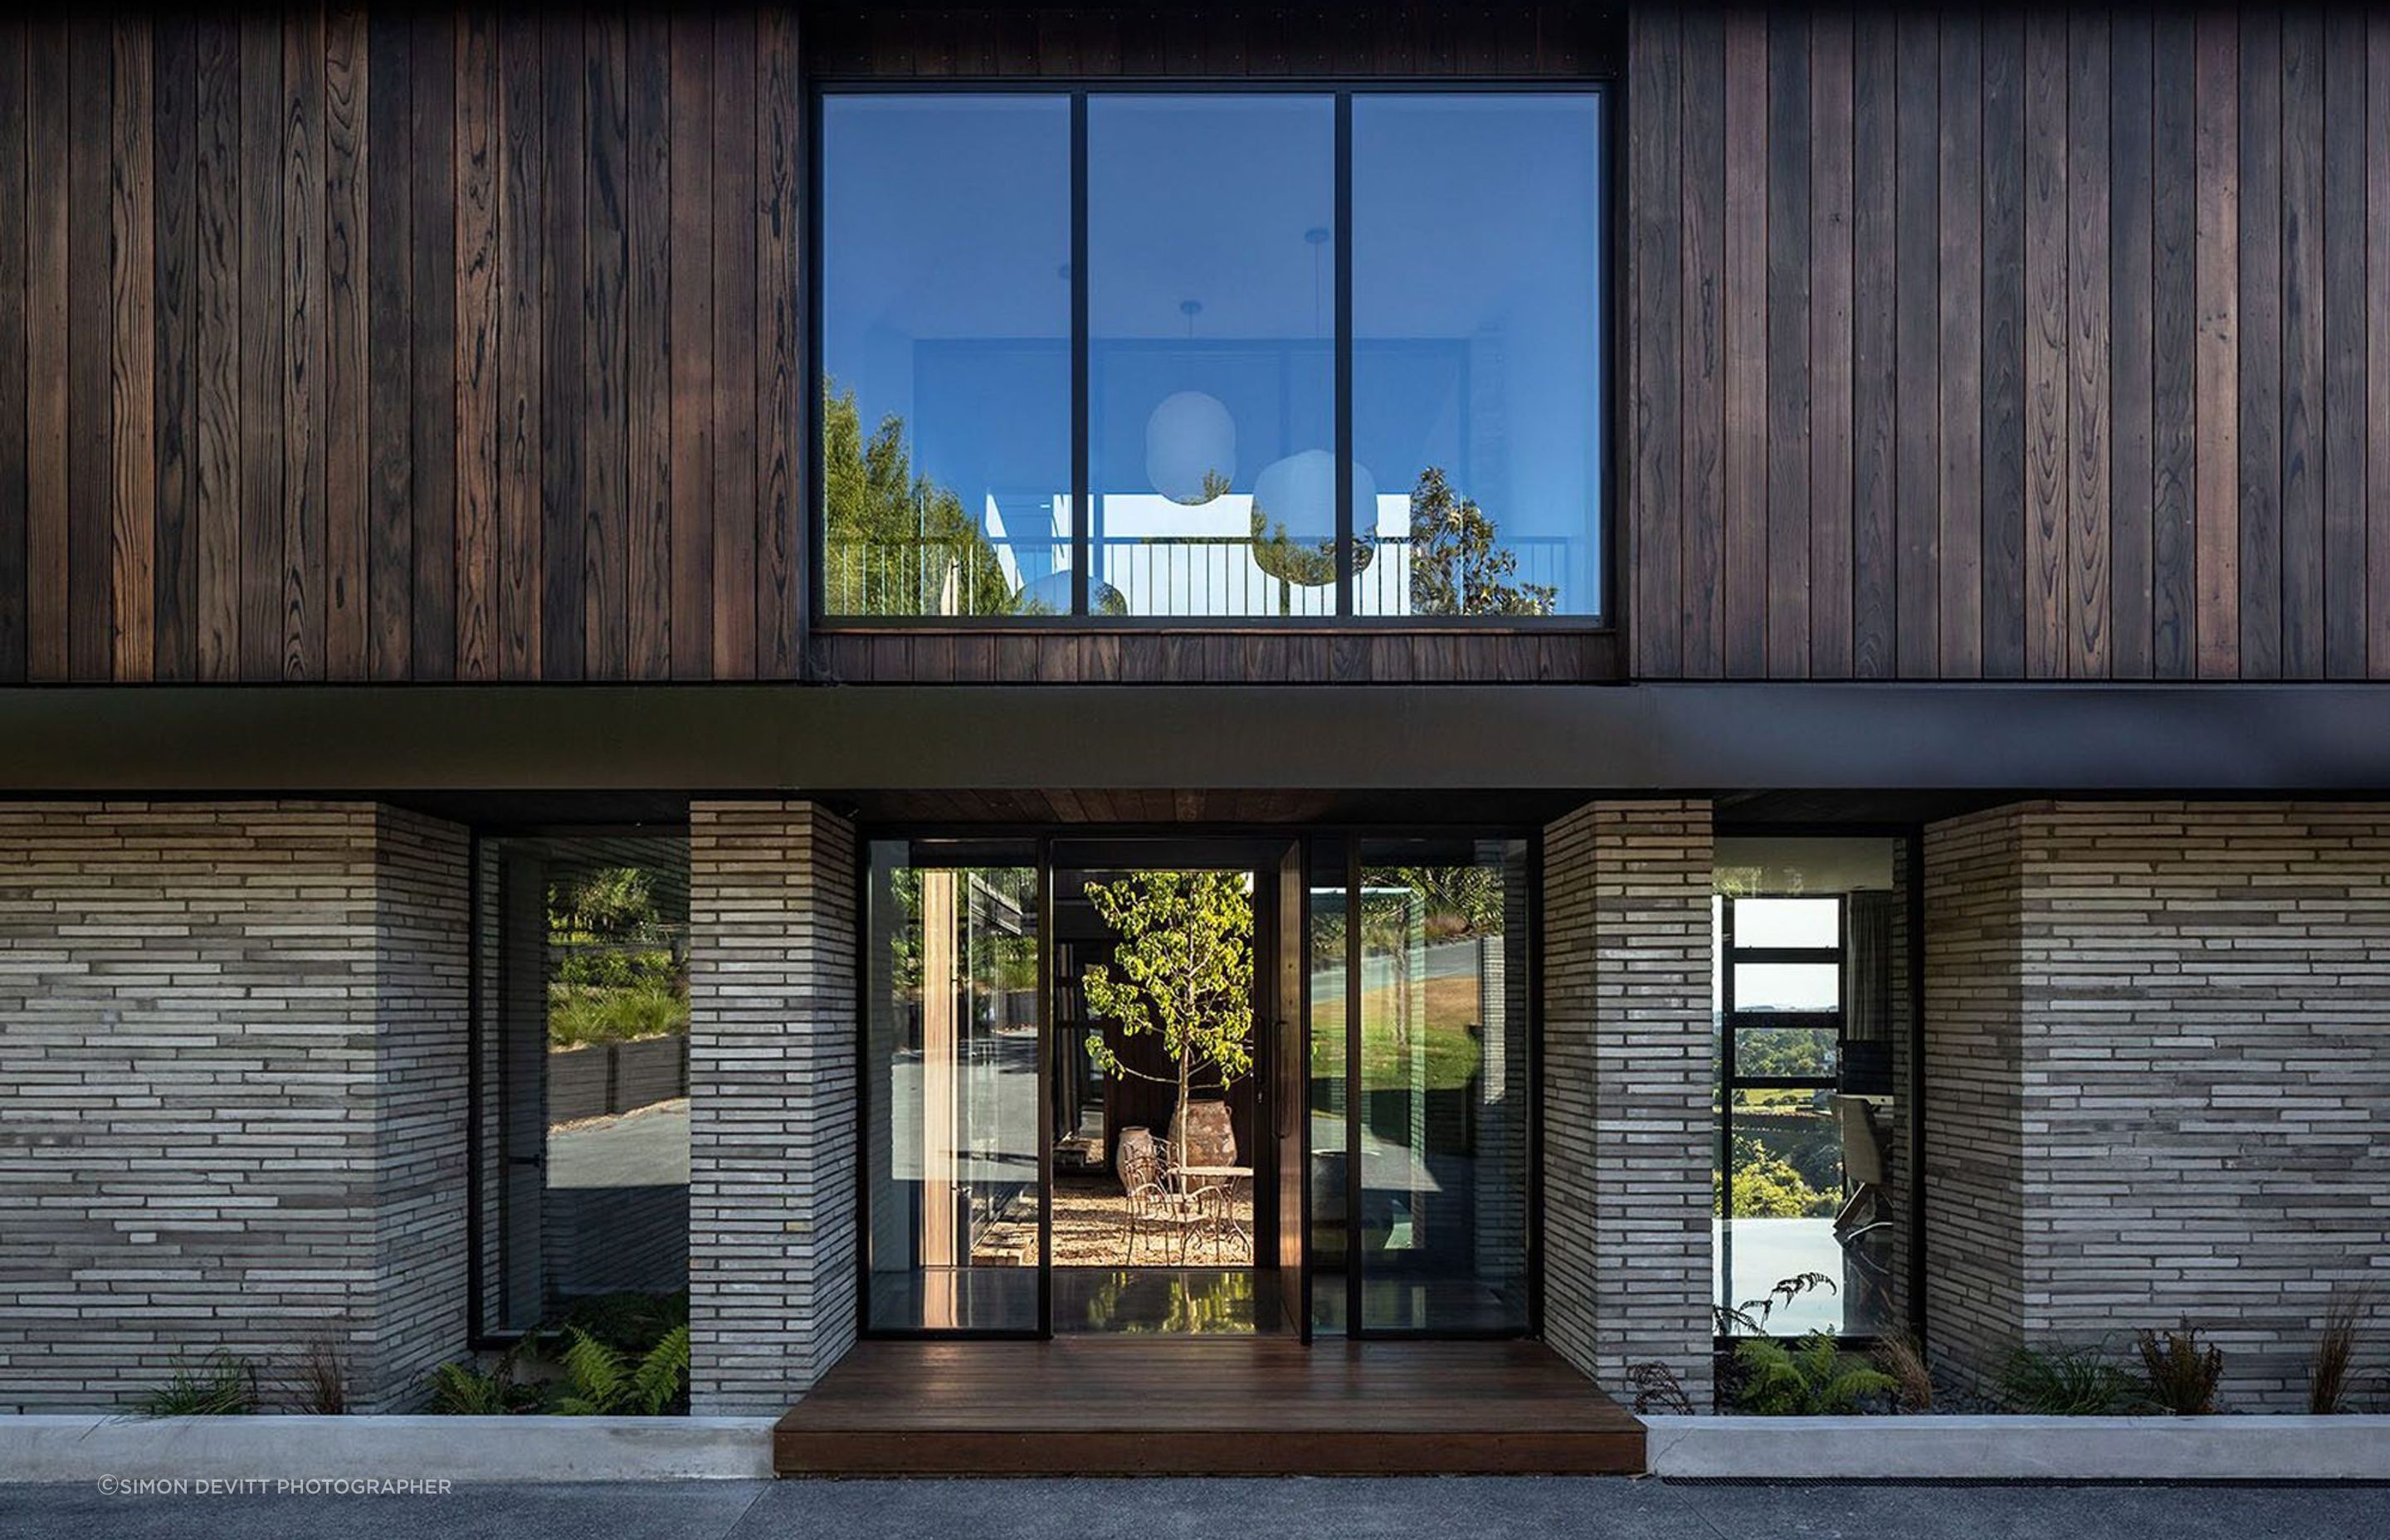 Concepts from Japanese and Chilean architecture were incorporated into the design with the use of courtyards.